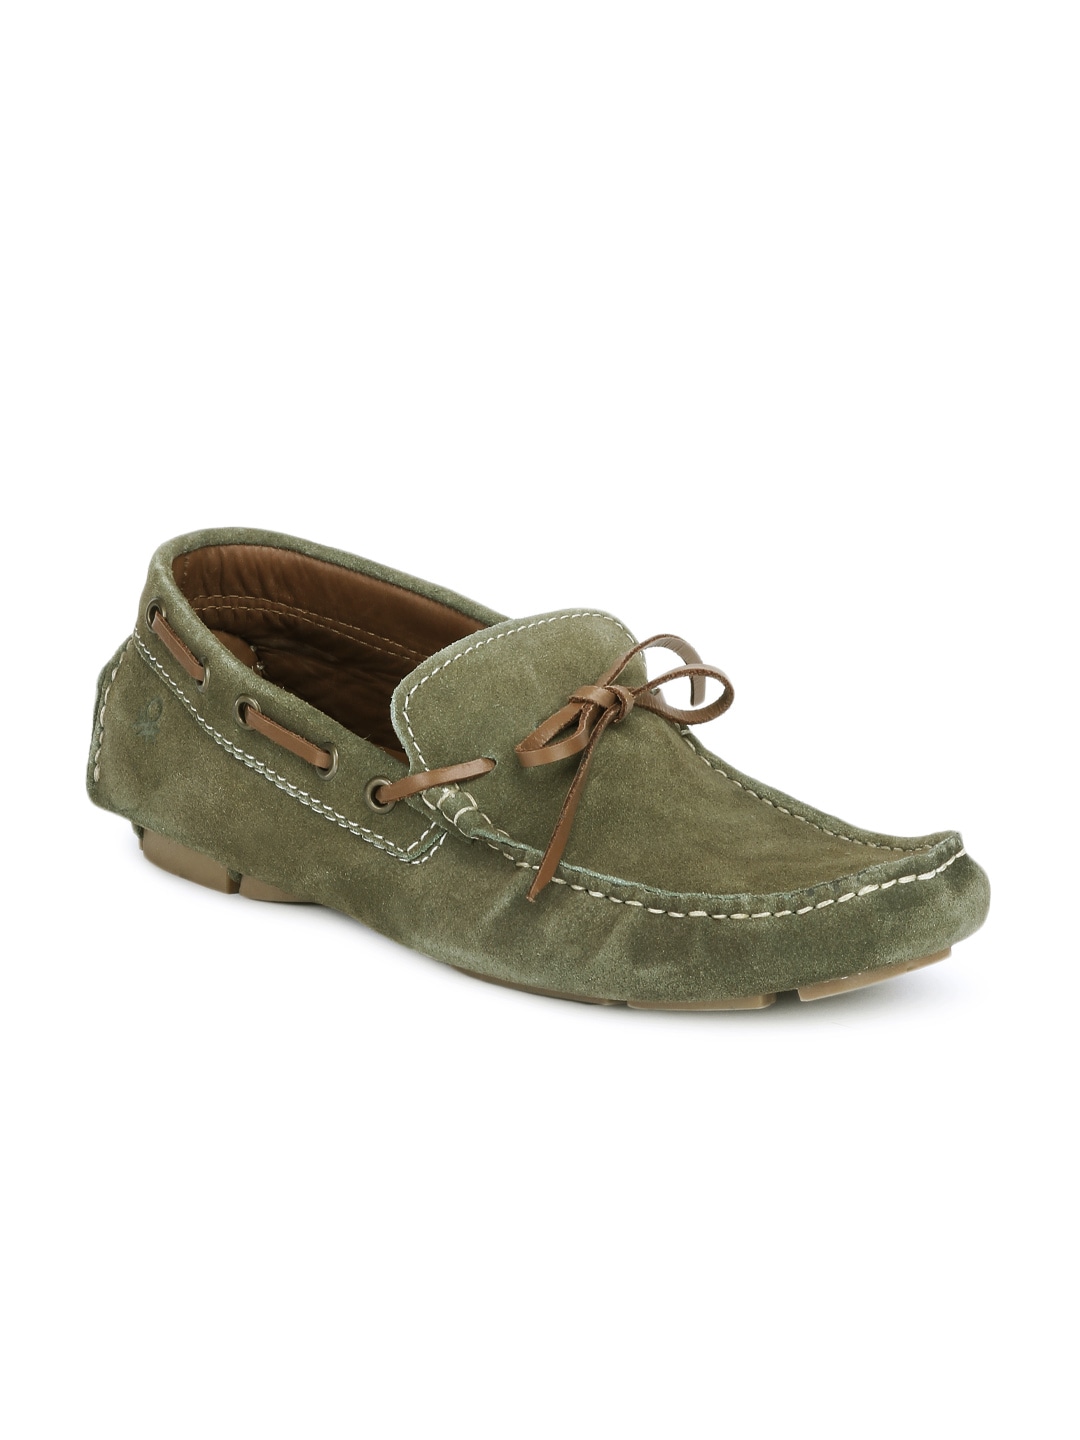 United Colors of Benetton Men Olive Shoes